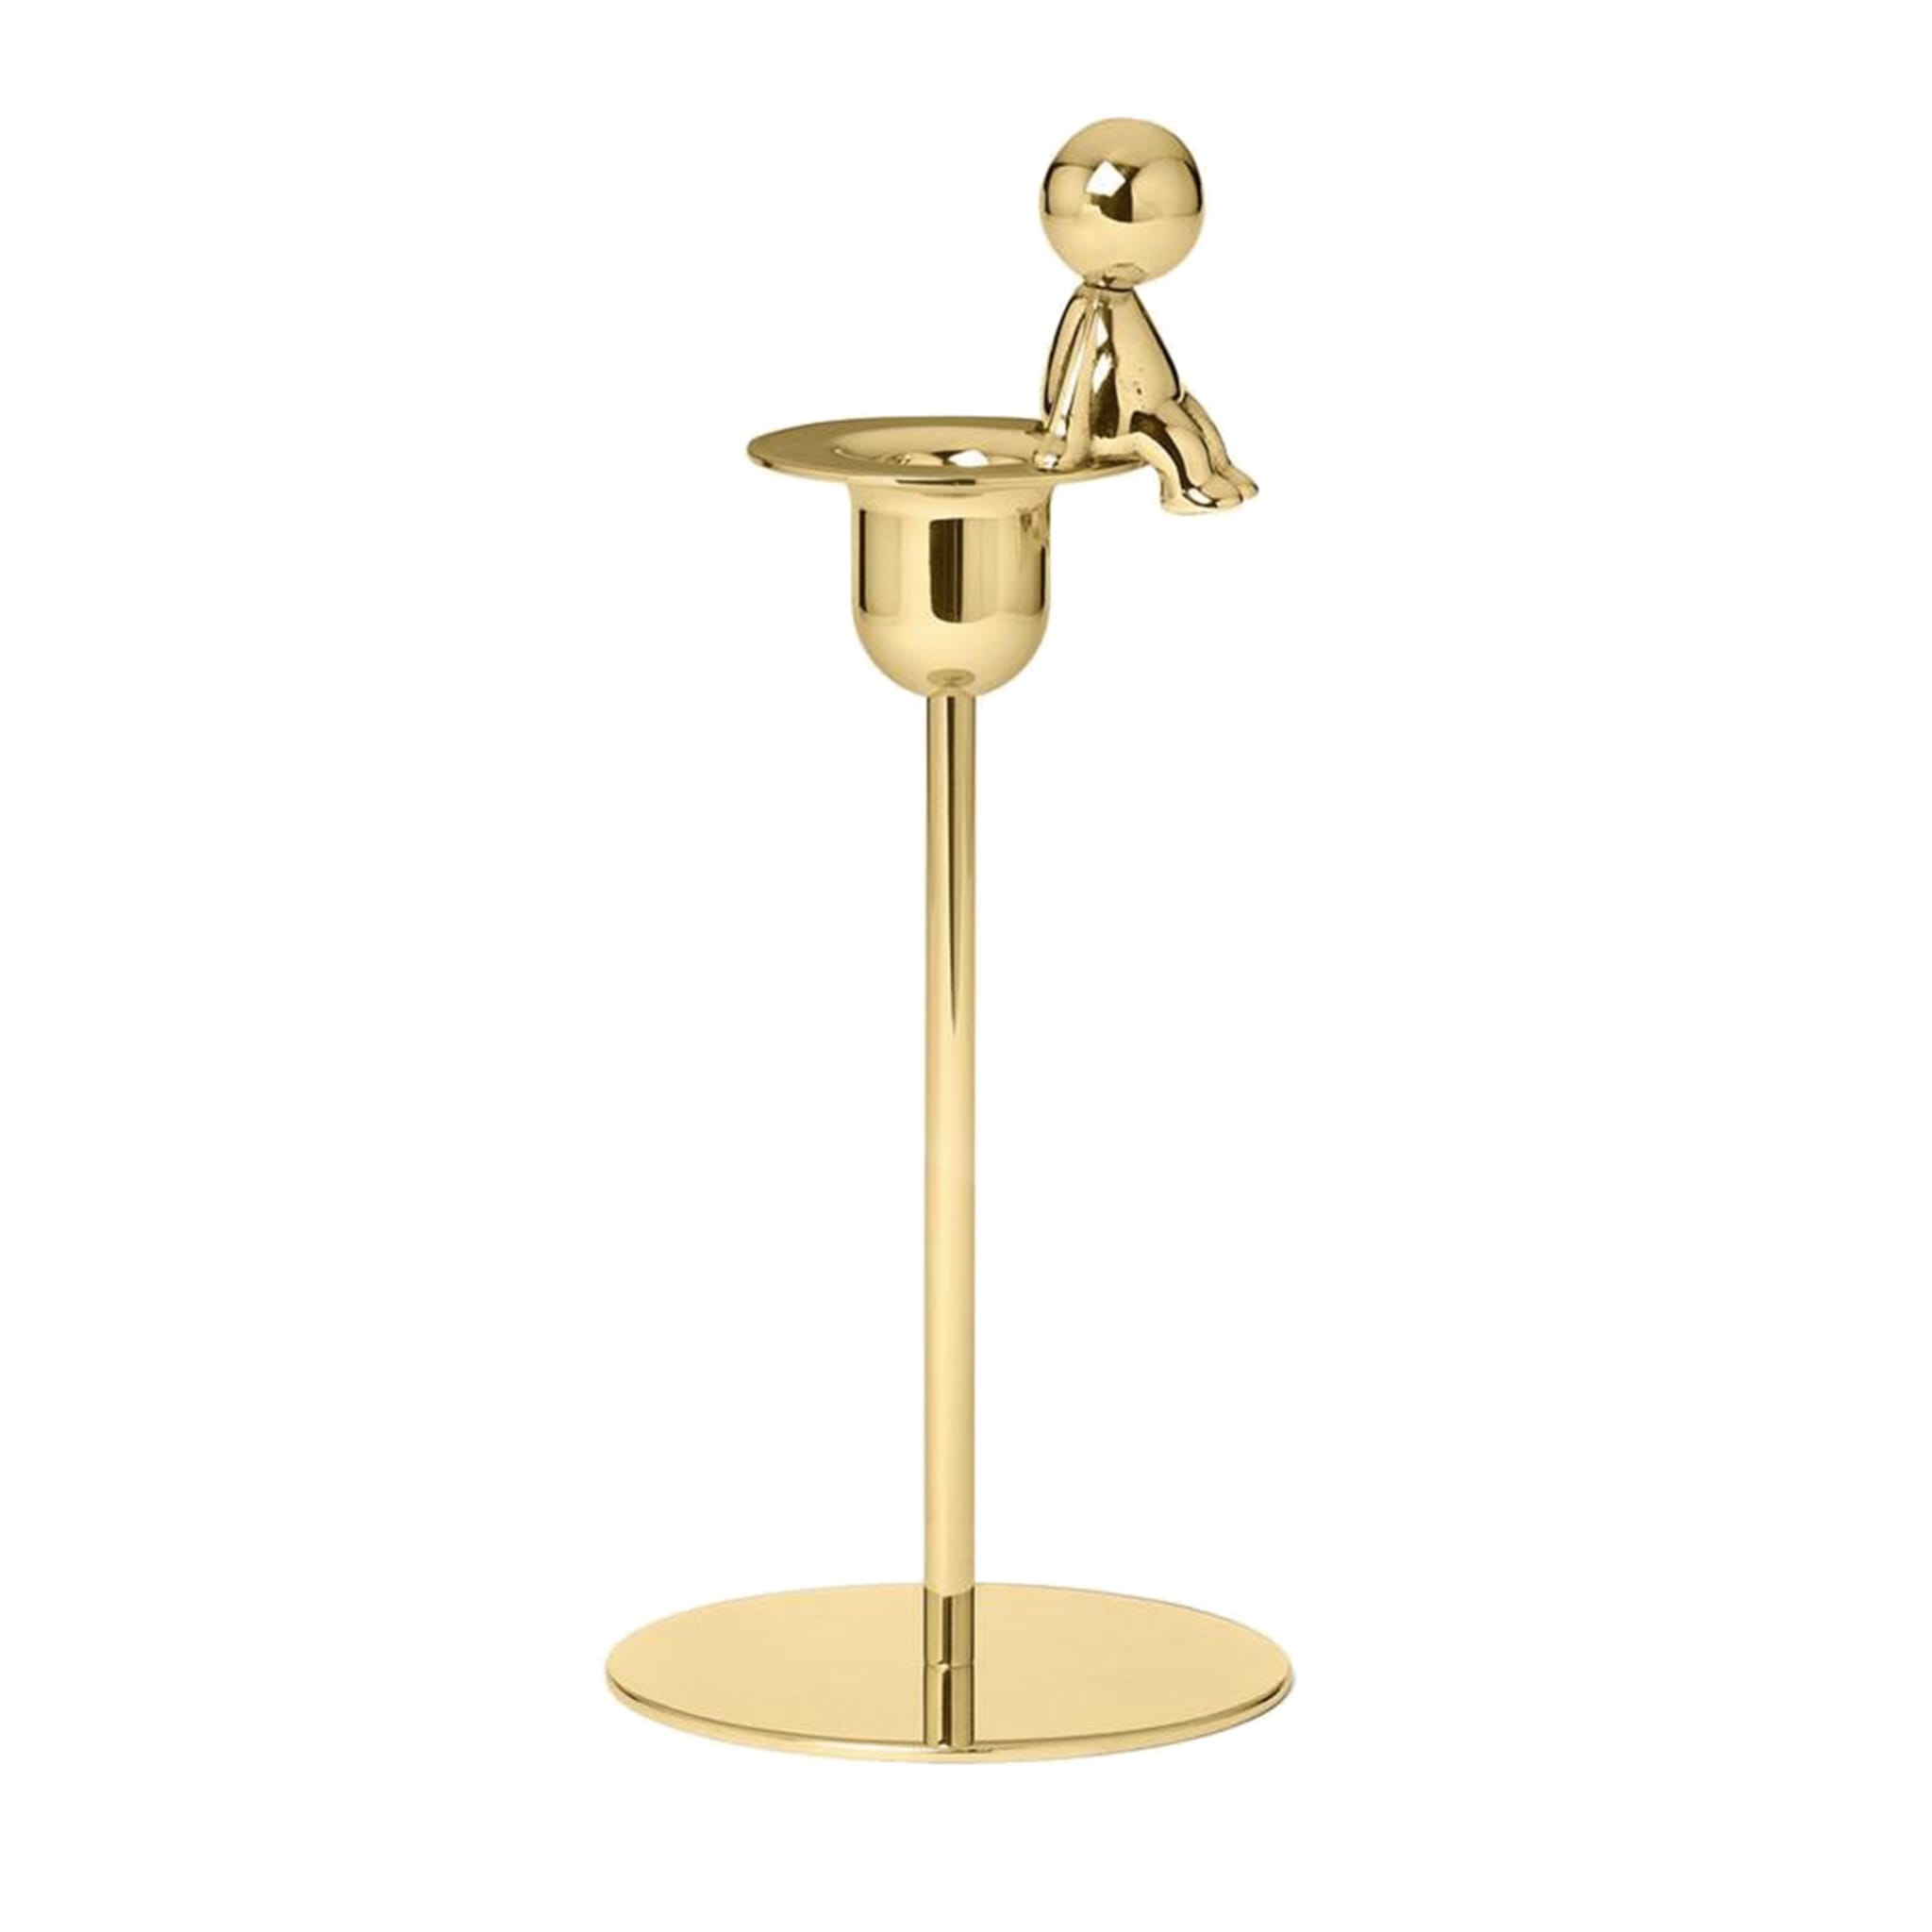 Omini Thinker Short Candlestick in Polished Brass By Stefano Giovannoni - Main view